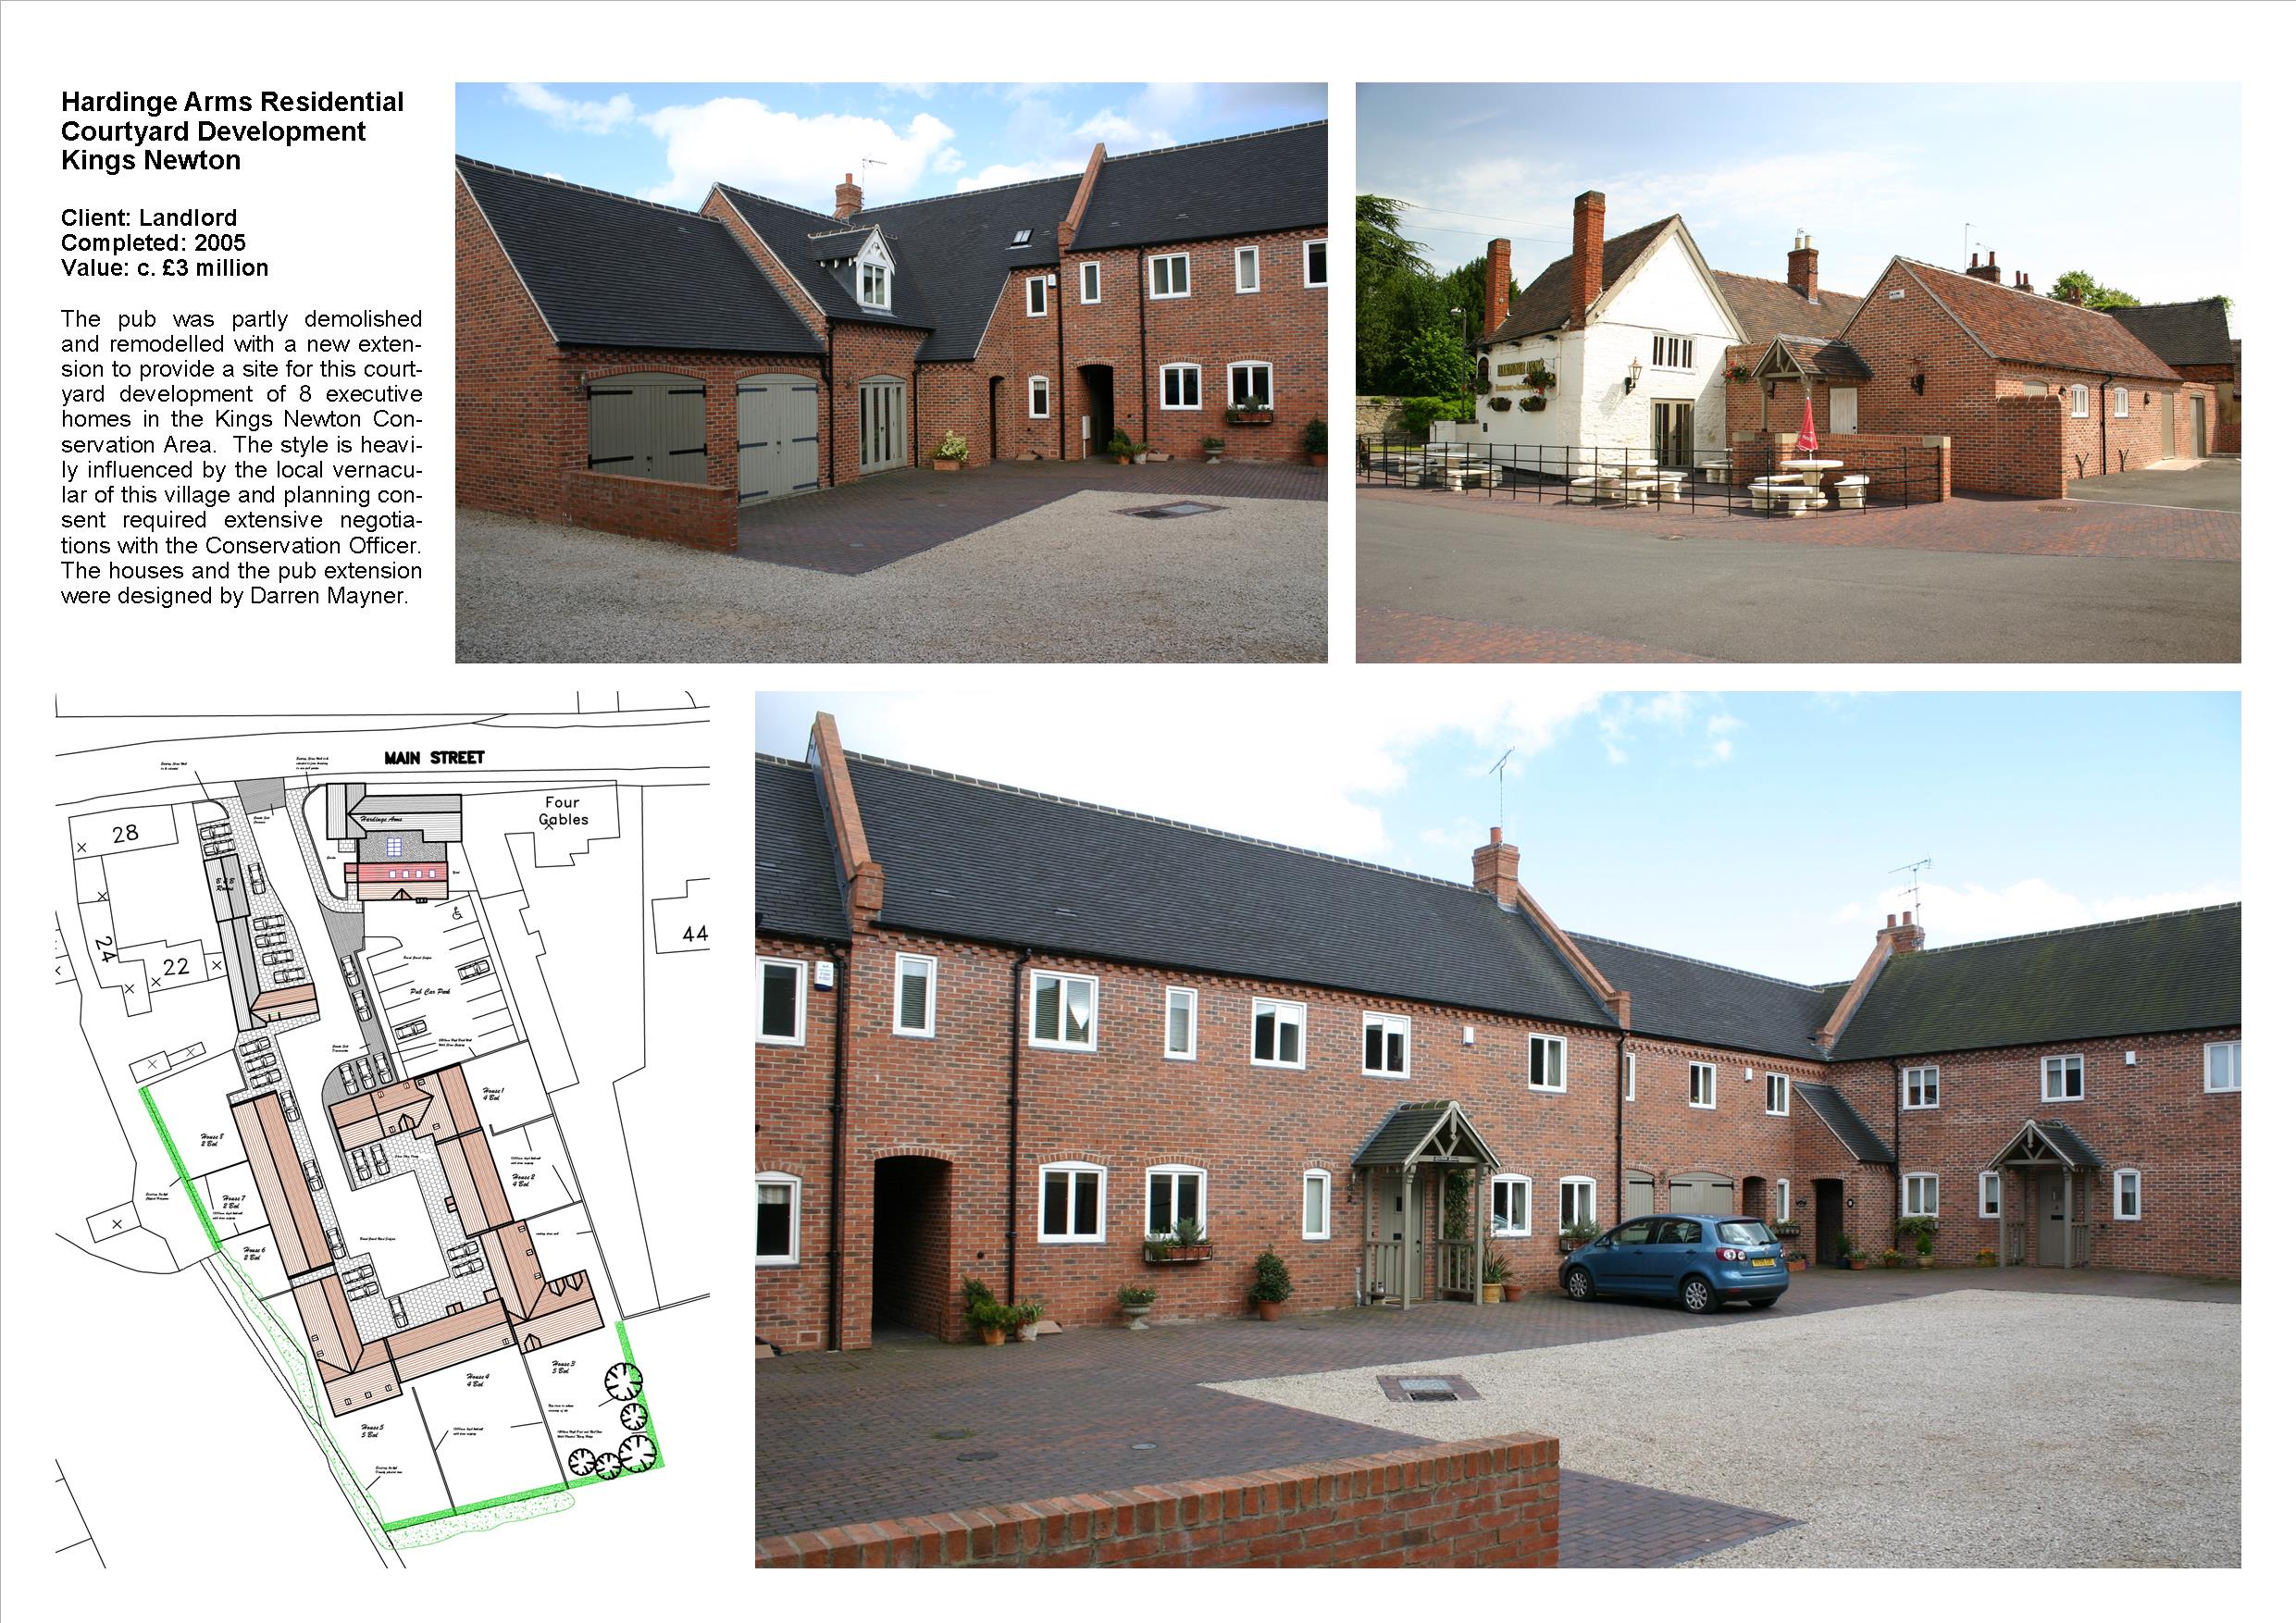 Reconfiguration of Hardinge Arms Kings Newton and design of new housing to rear by Darren Mayner